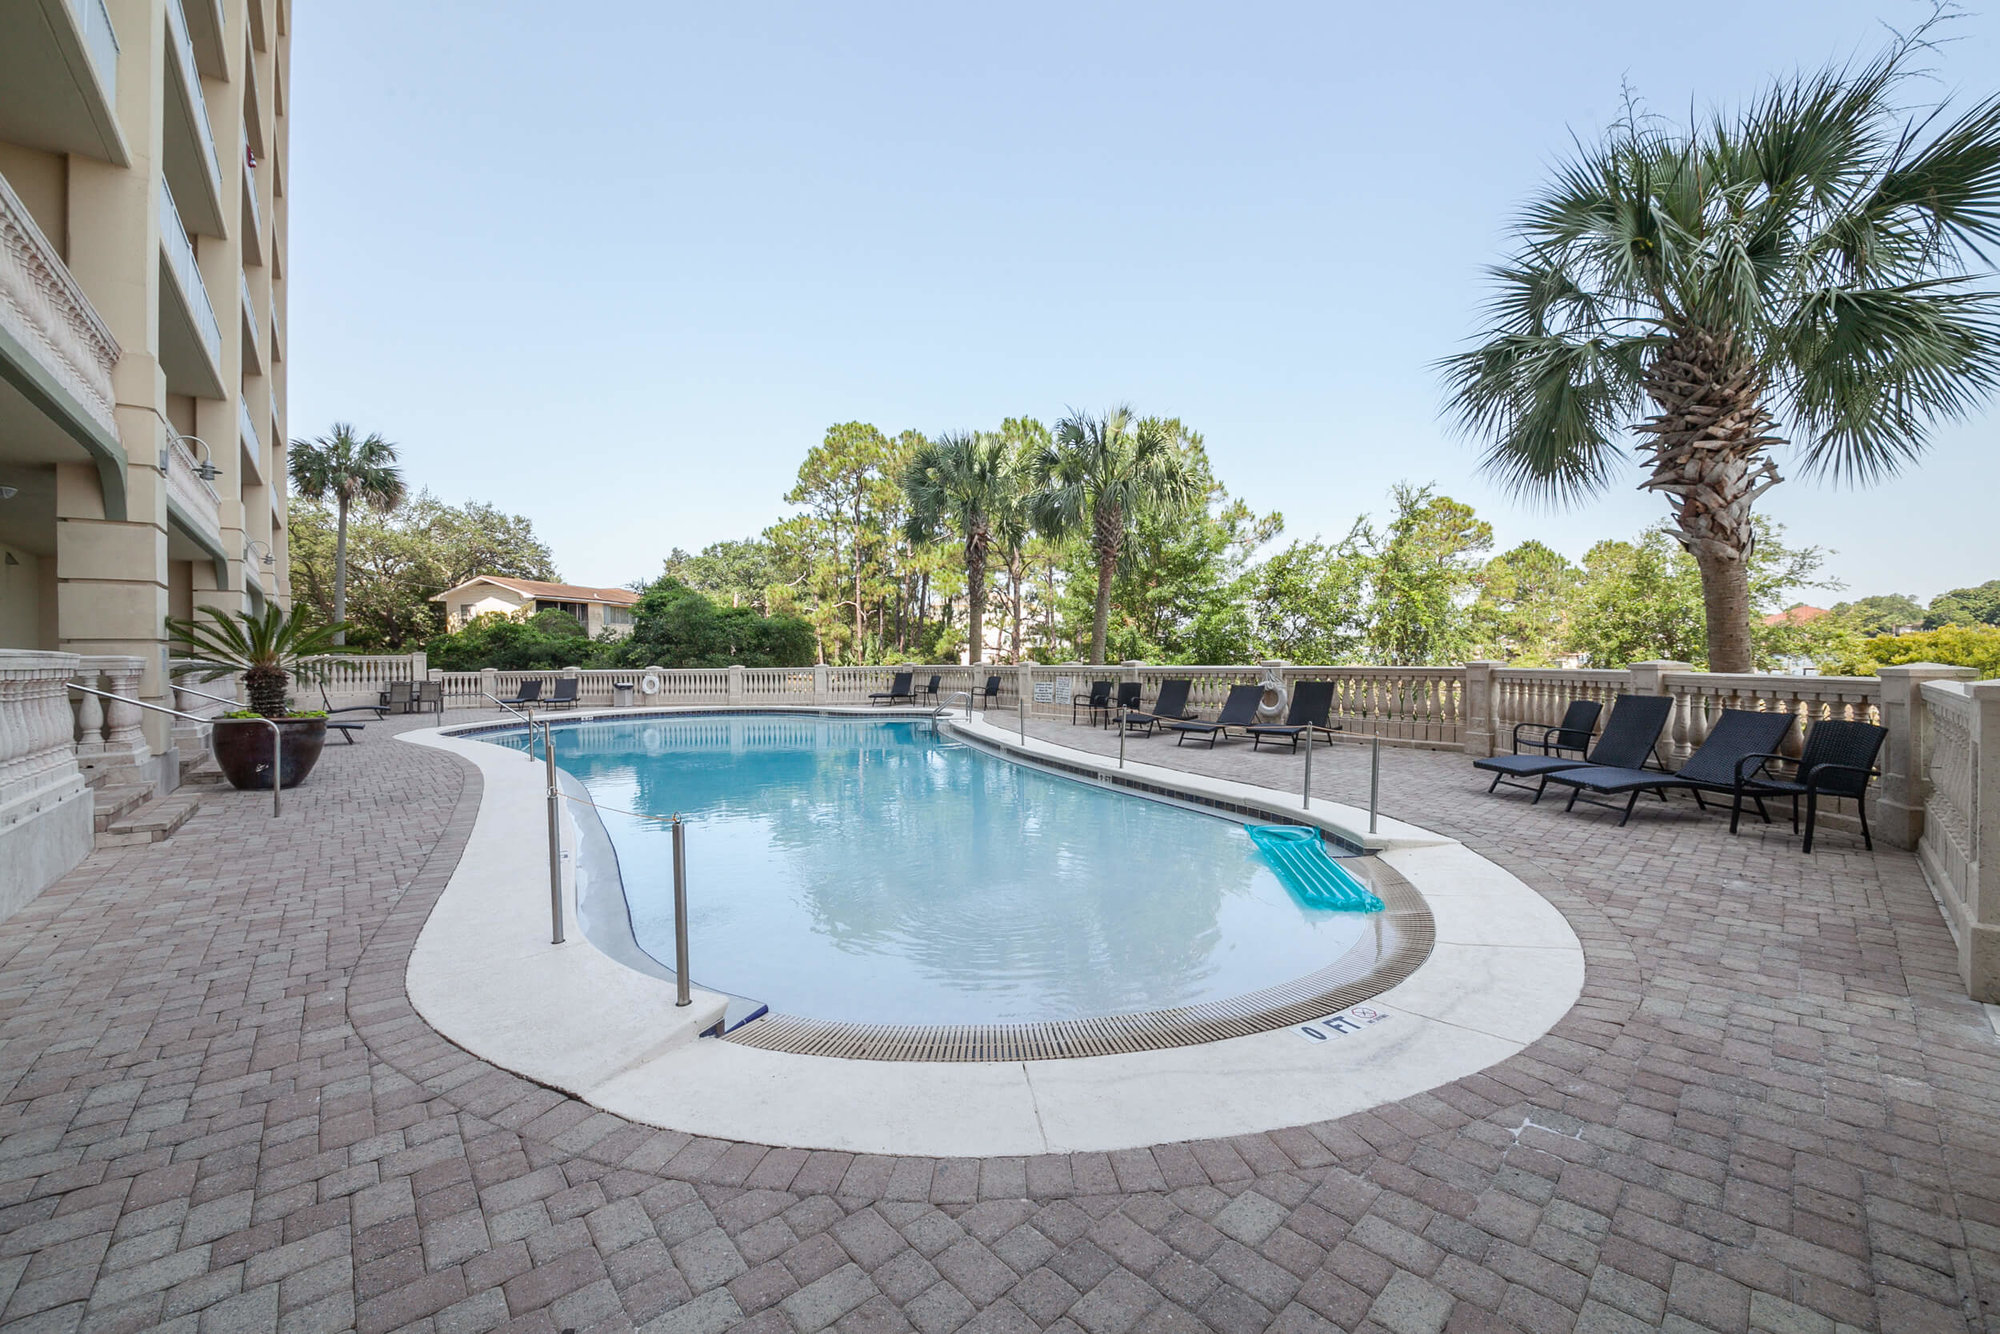 Zero entry pool surrounded by palm trees and large sundeck at Sailmaker's Place in Perdido Key